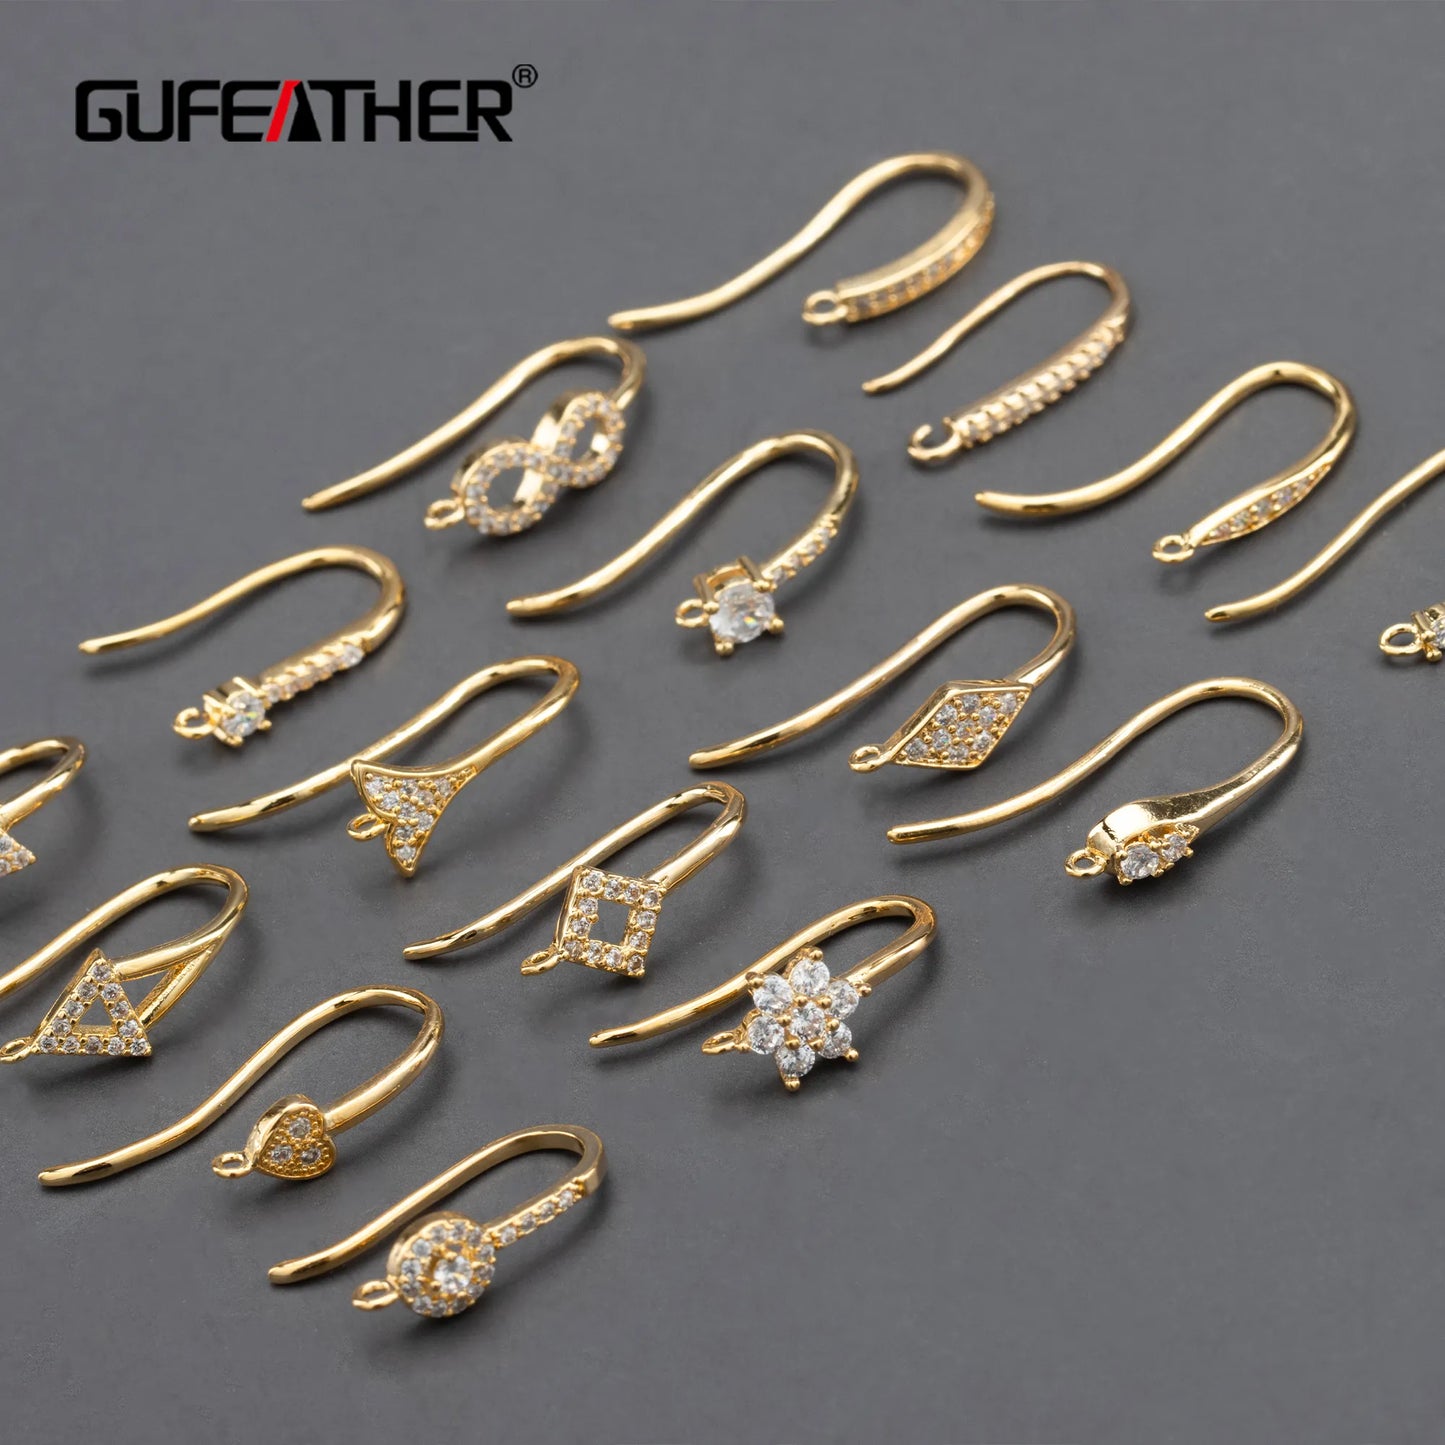 GUFEATHER M800,jewelry accessories,pass REACH,nickel free,18k gold plated,copper,connector,diy earring,jewelry making,20pcs/lot